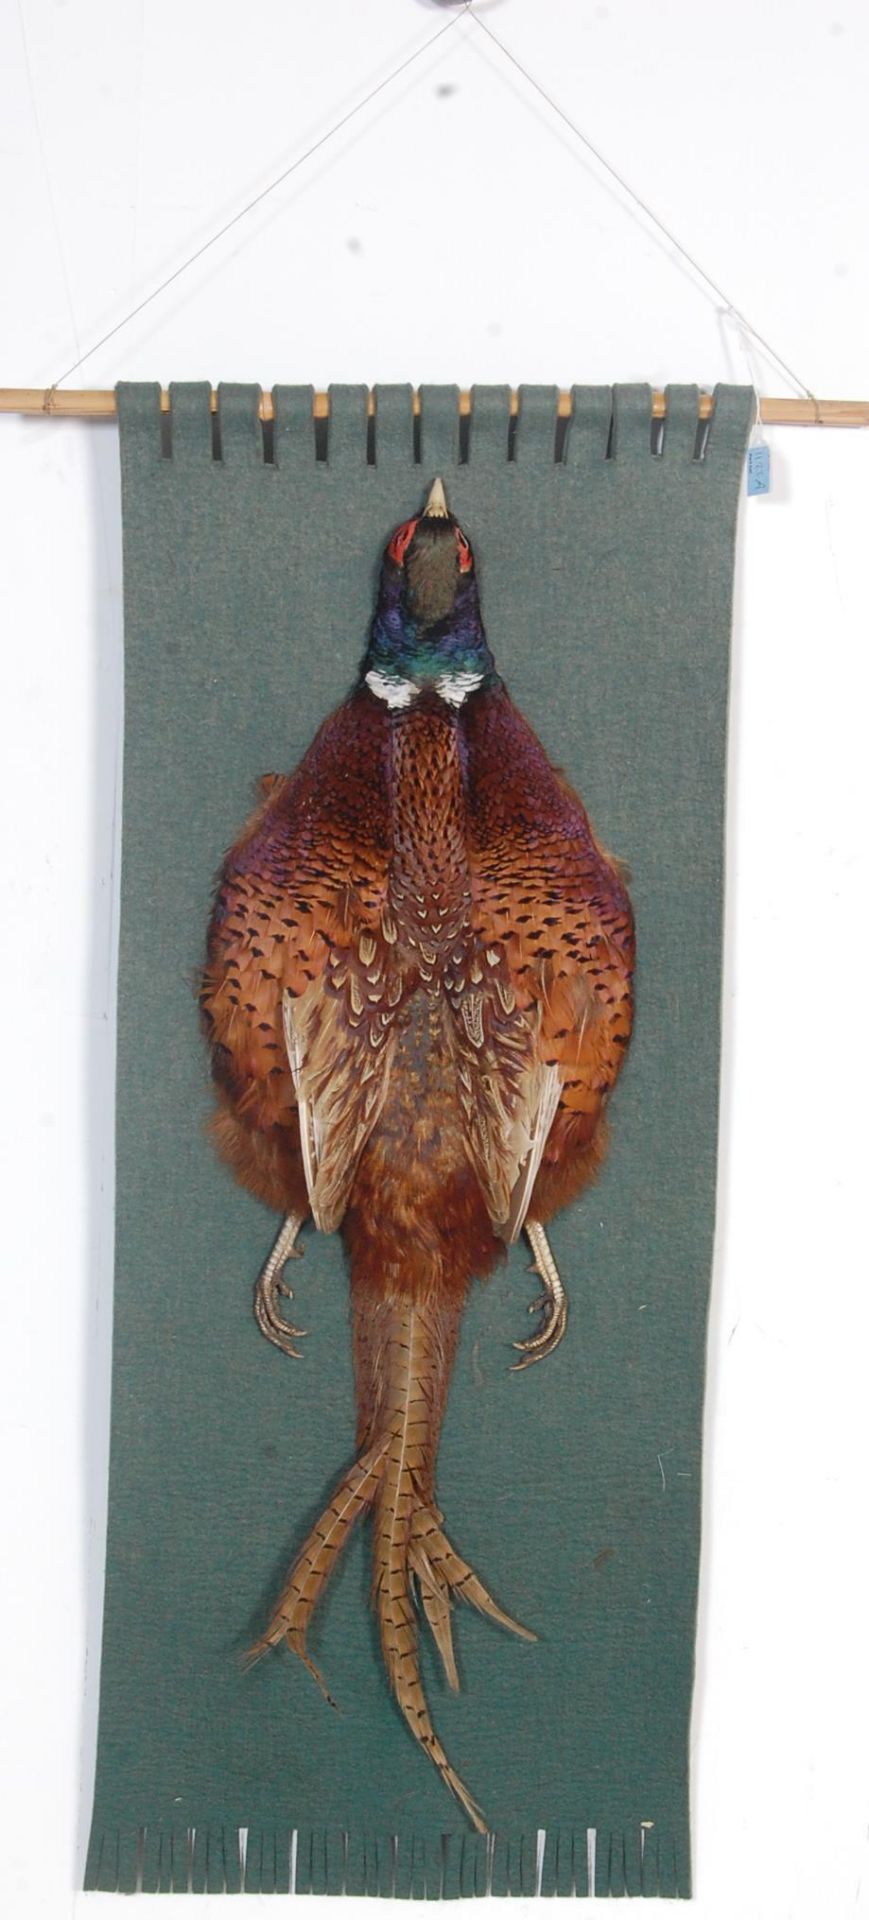 VINTAGE LATE 20TH CENTURY TAXIDERMY WALL HANGING OF A PHEASANT - Image 6 of 6